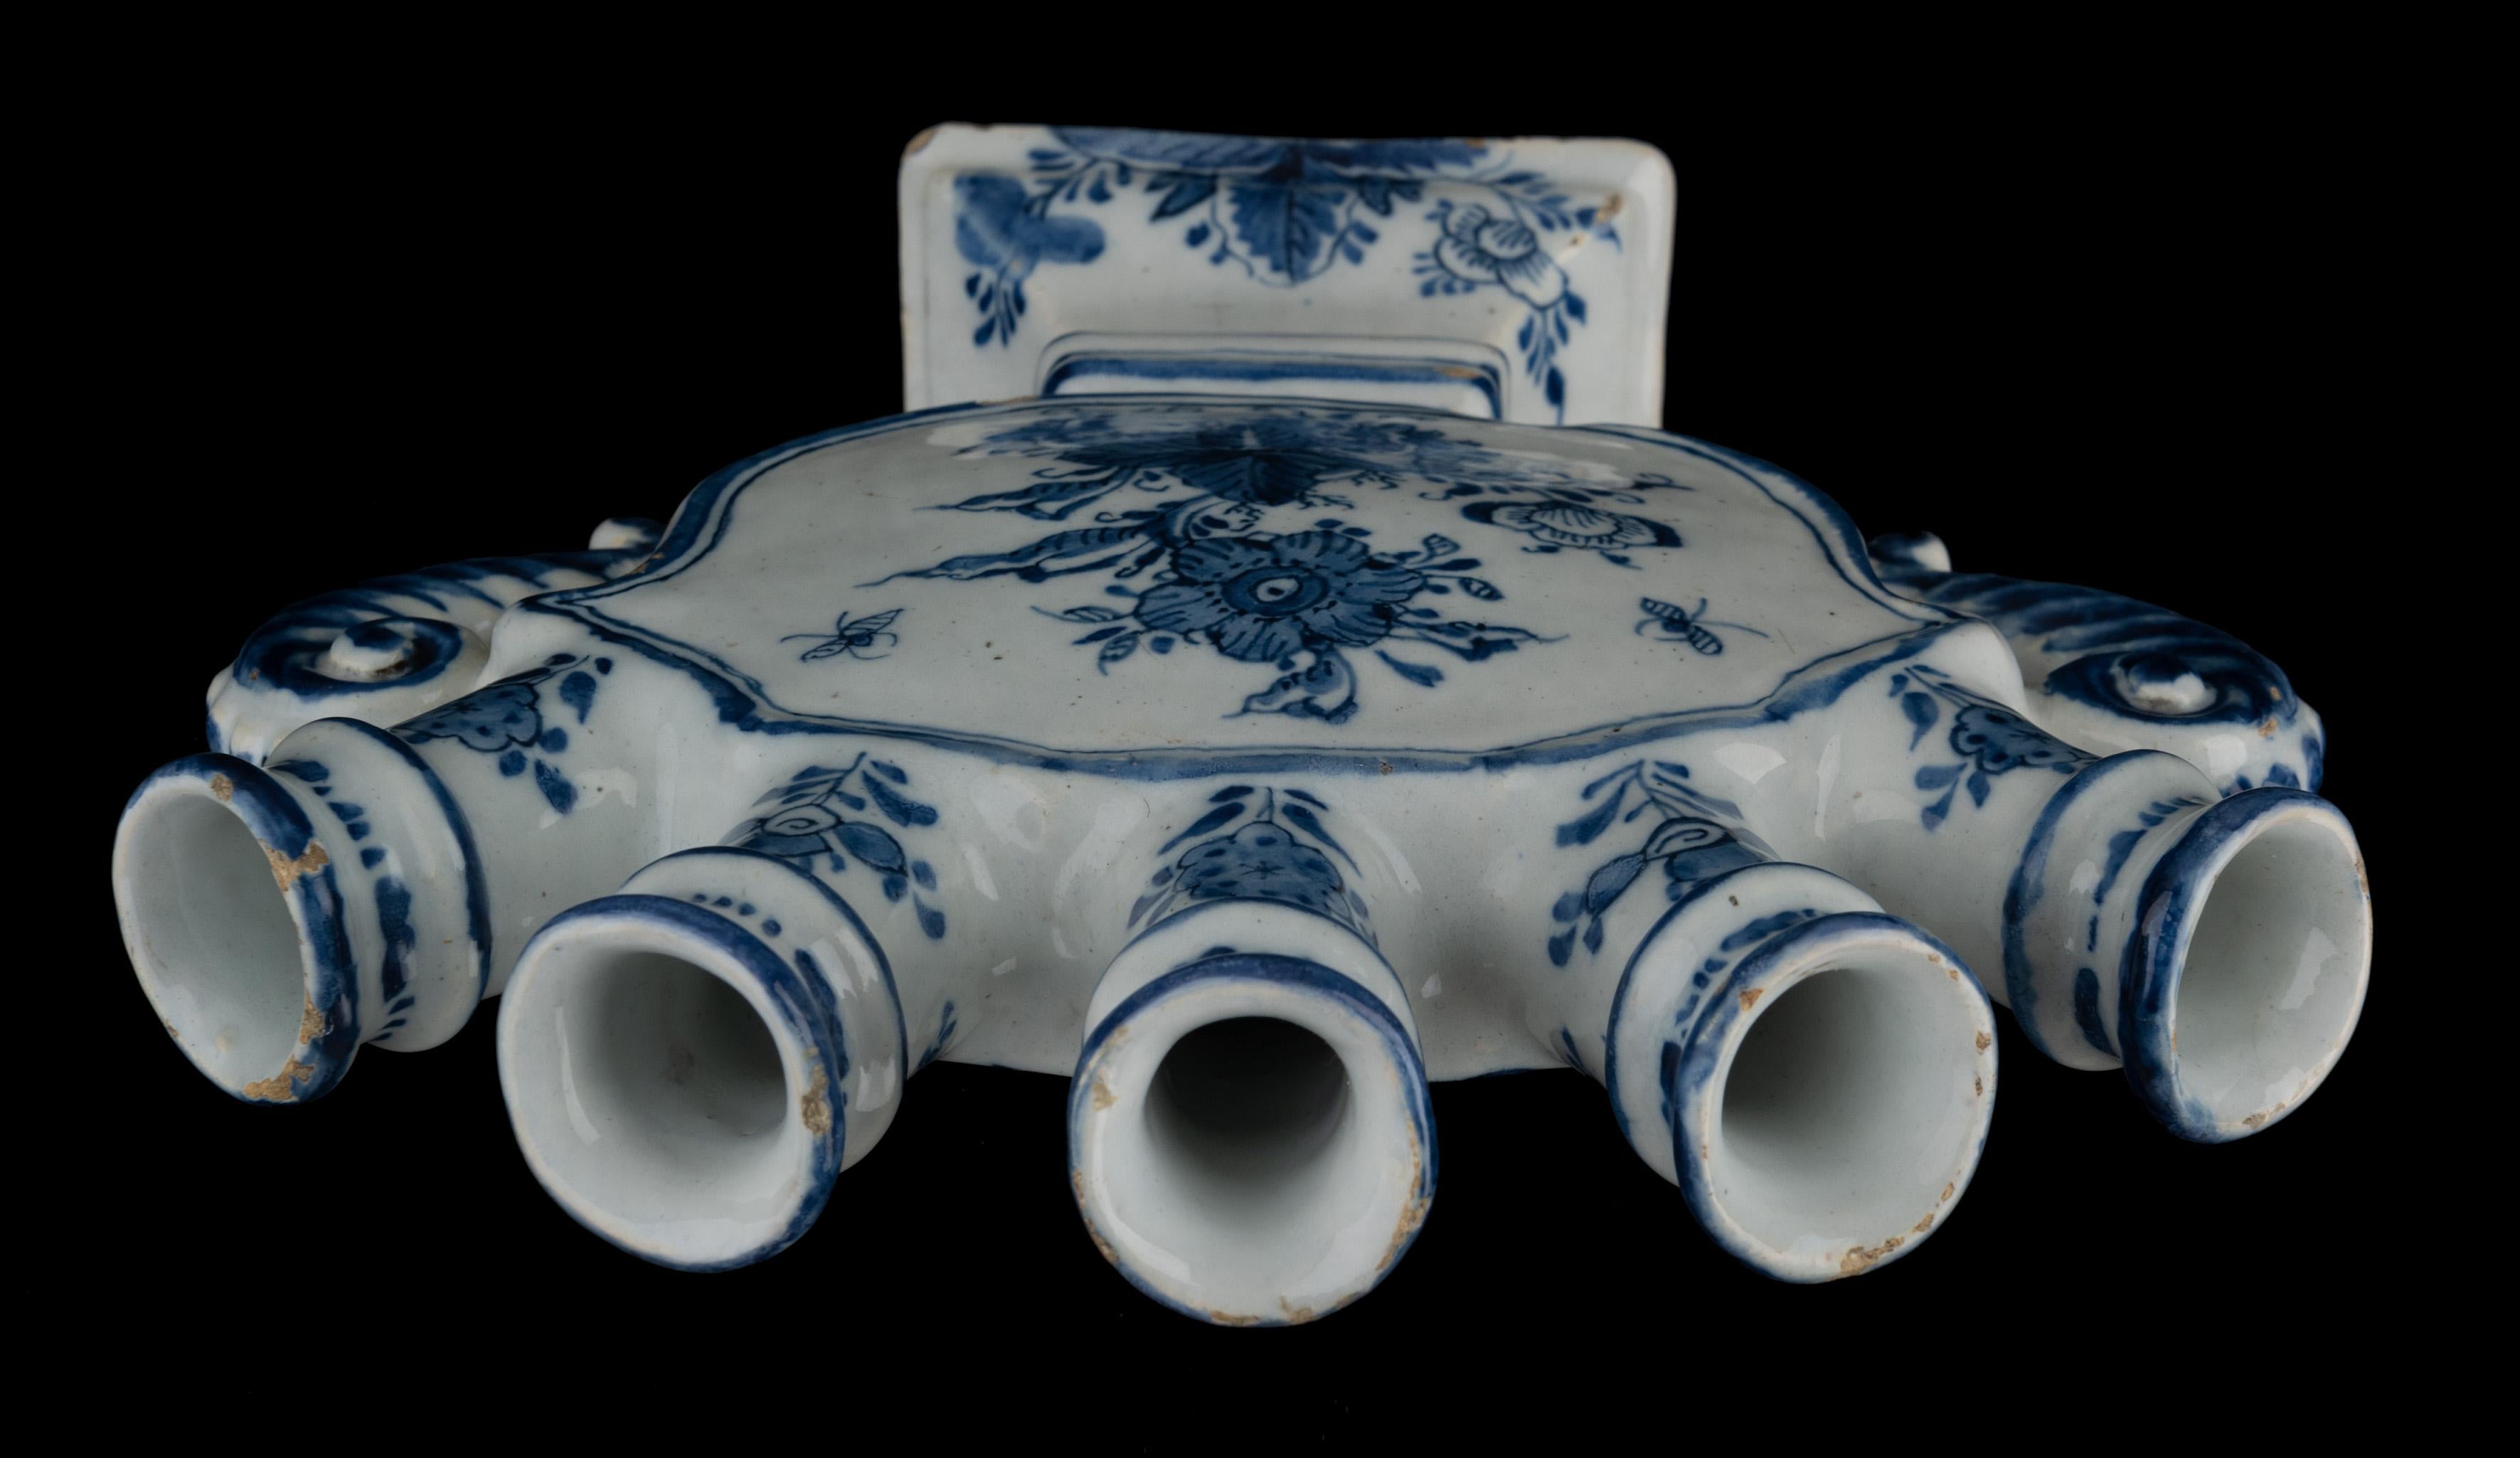 Ceramic Delft Blue and White Flower Vase with Spouts 1720-1730 Tulip Vase For Sale